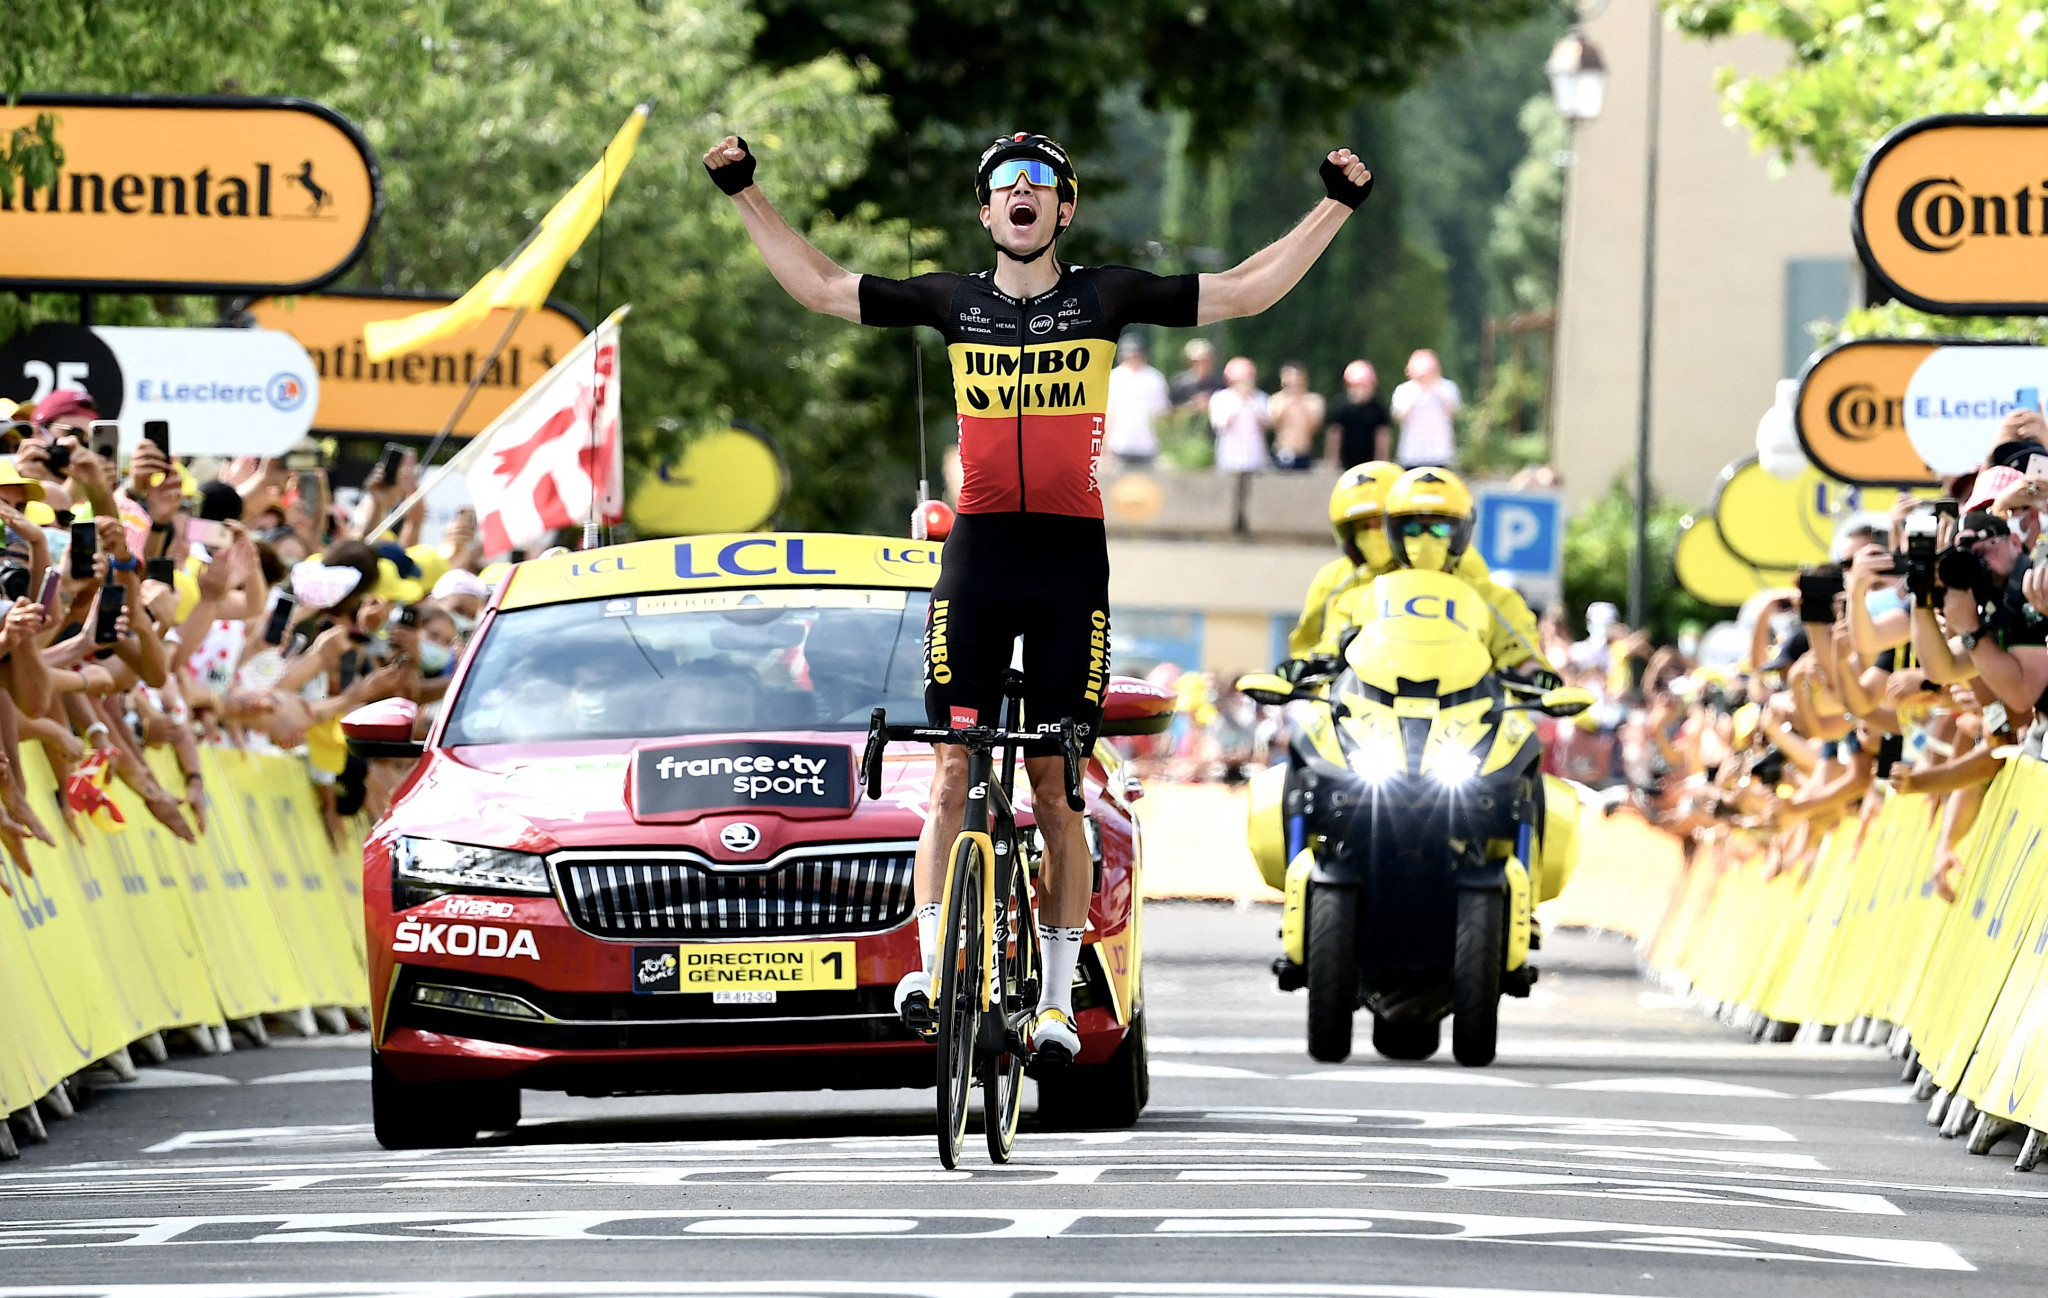 Wout van Aert won stage 11 of the 2021 Tour de France ©Getty Images